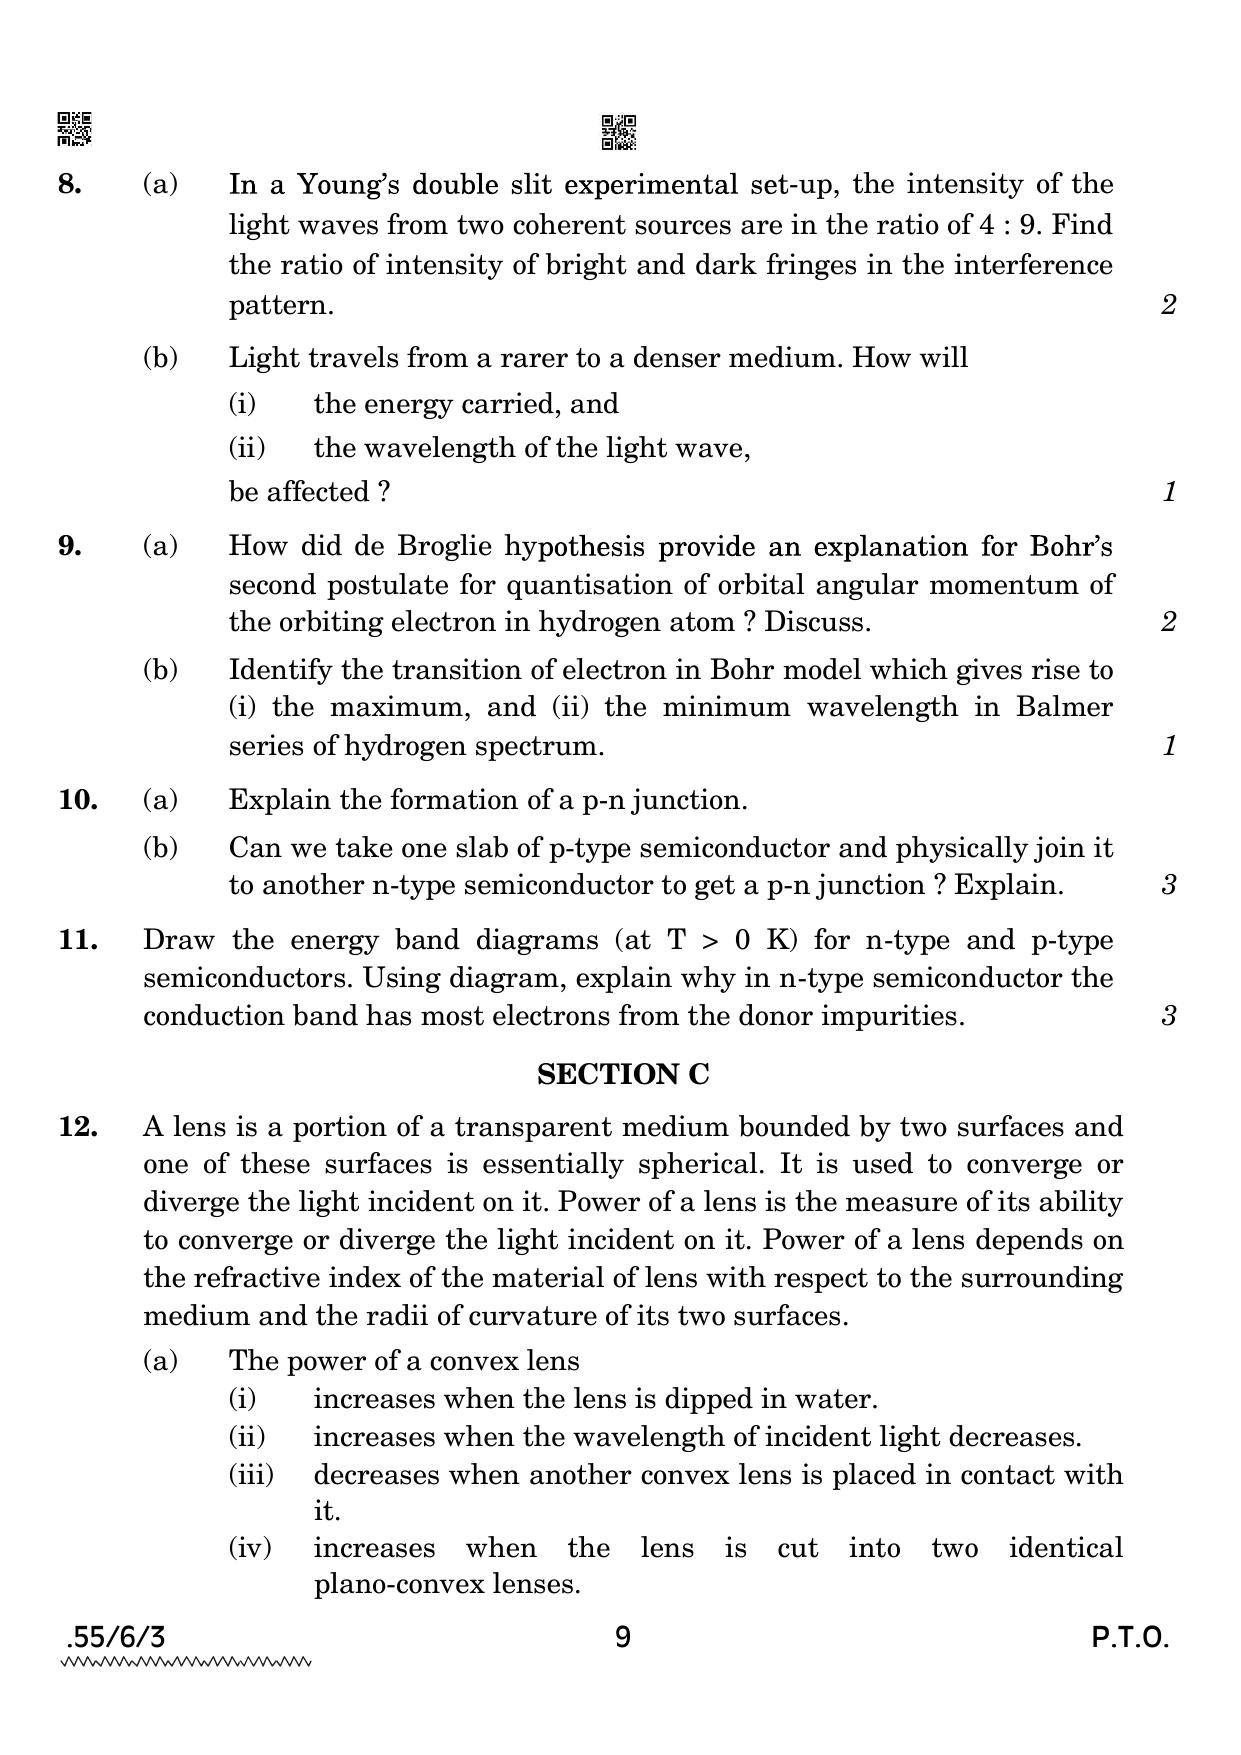 CBSE Class 12 55-6-3 PHYSICS 2022 Compartment Question Paper - Page 9